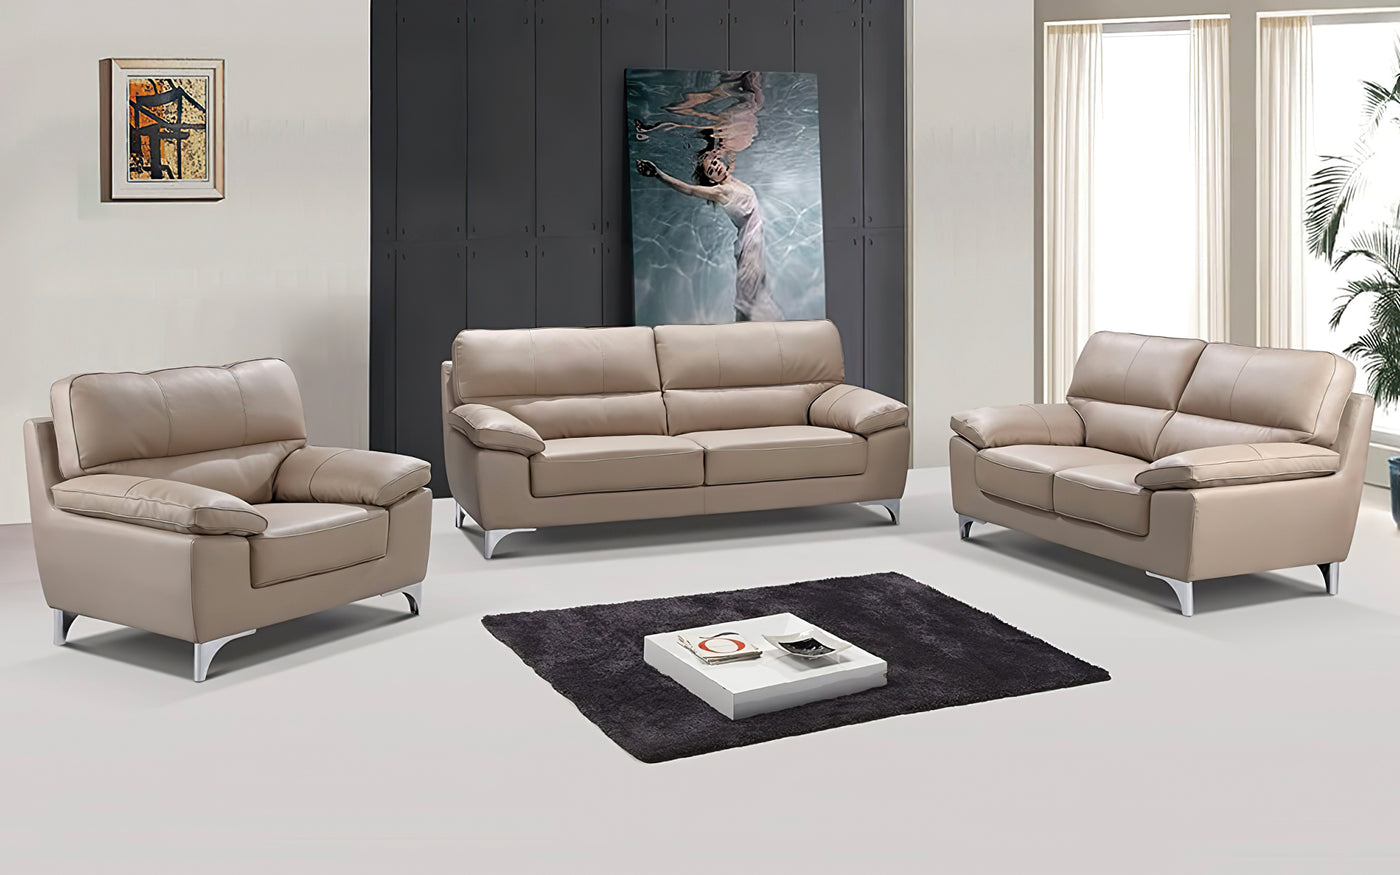 Amazon.com: VanAcc Modern Sofa Couch, 3 Piece Set 24''Extra Deep Seat  Sectional Sofa for Living Room, 85 inch Oversized Sofa, 3 Seat Sofa,  Loveseat and Single Sofa, Calico : Home & Kitchen